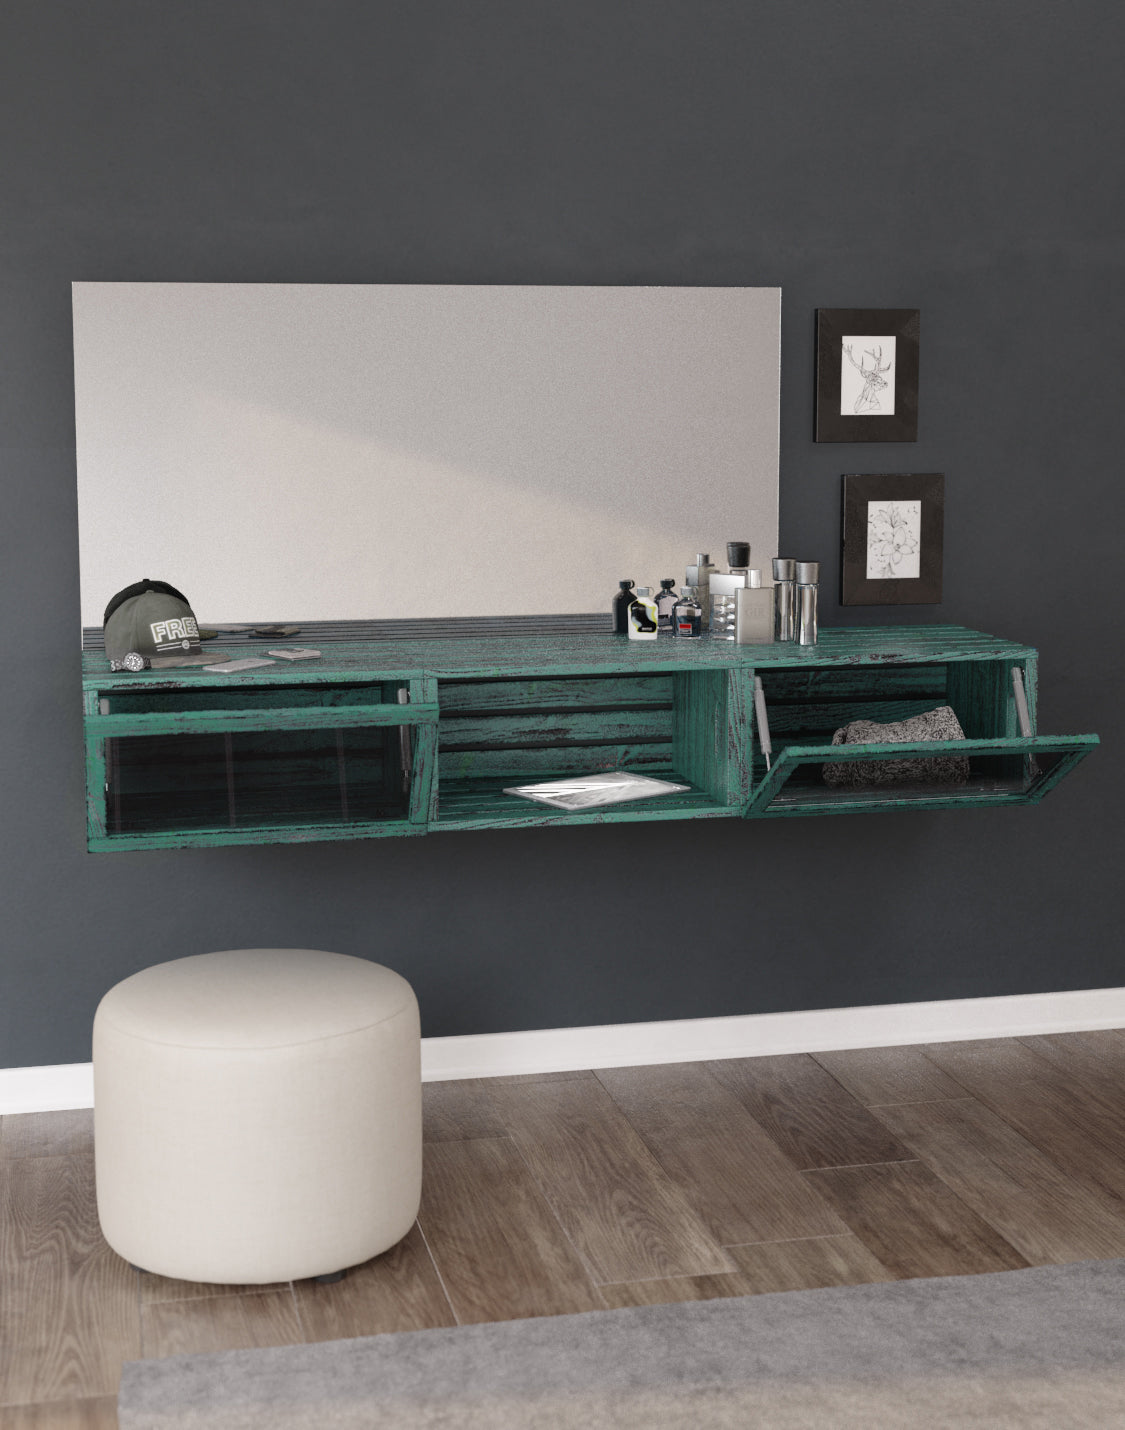 Volpi Dresser Modular And real wood furniture product